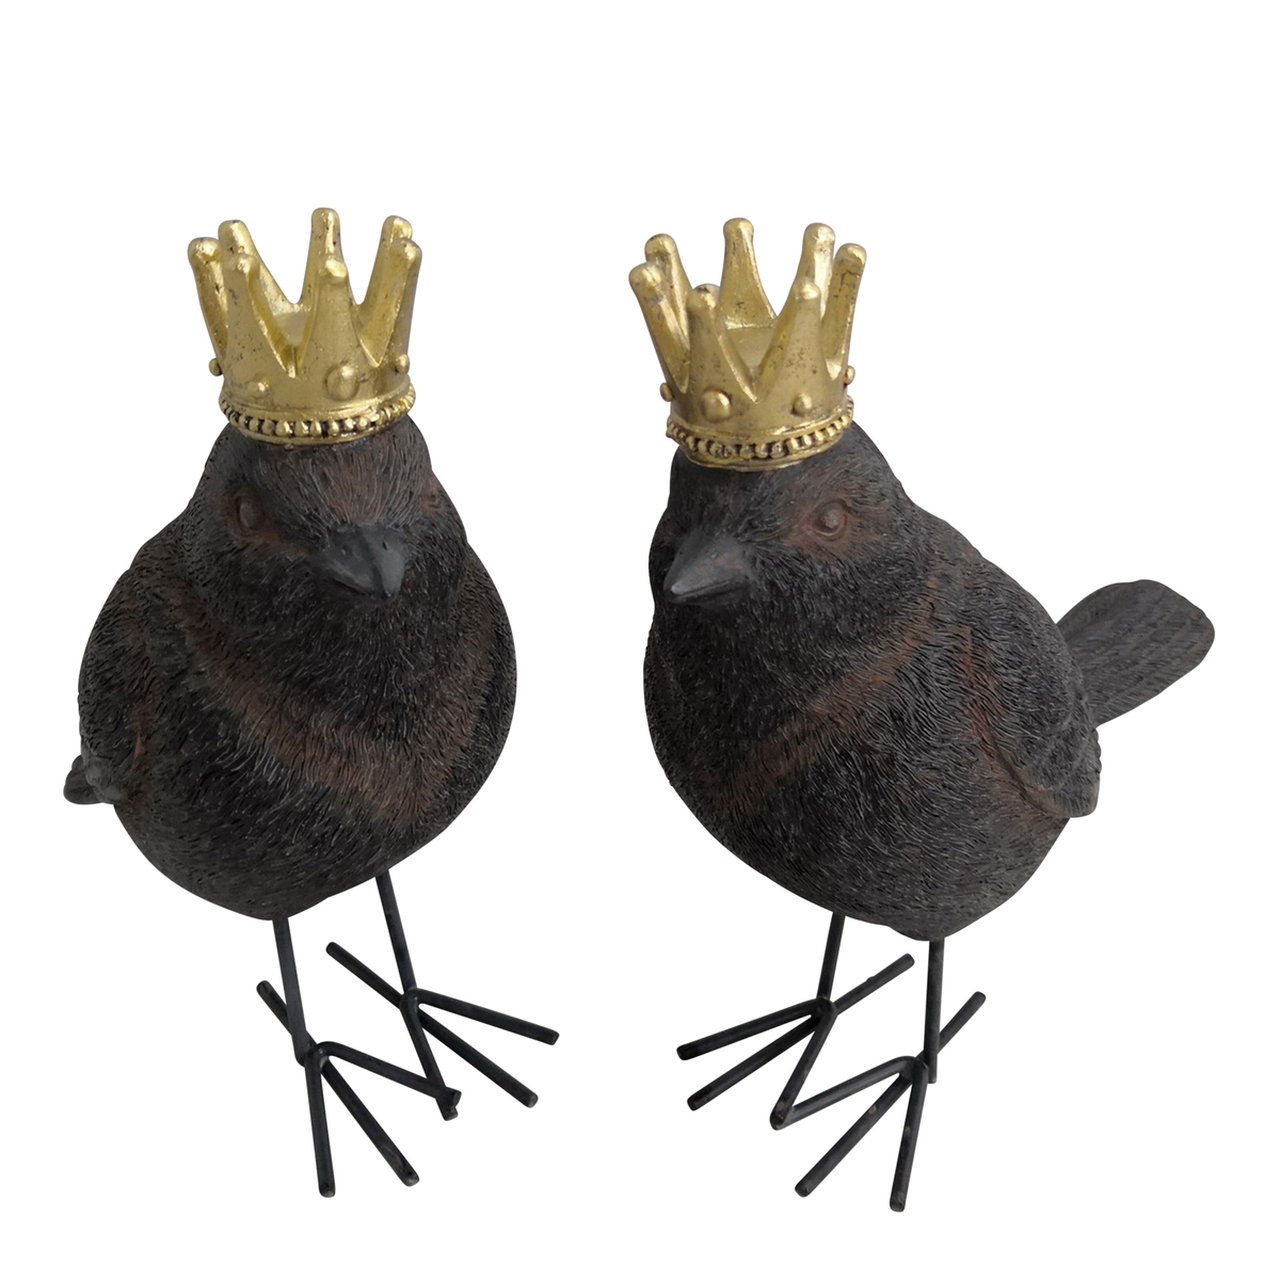 Birds With Gold Crowns